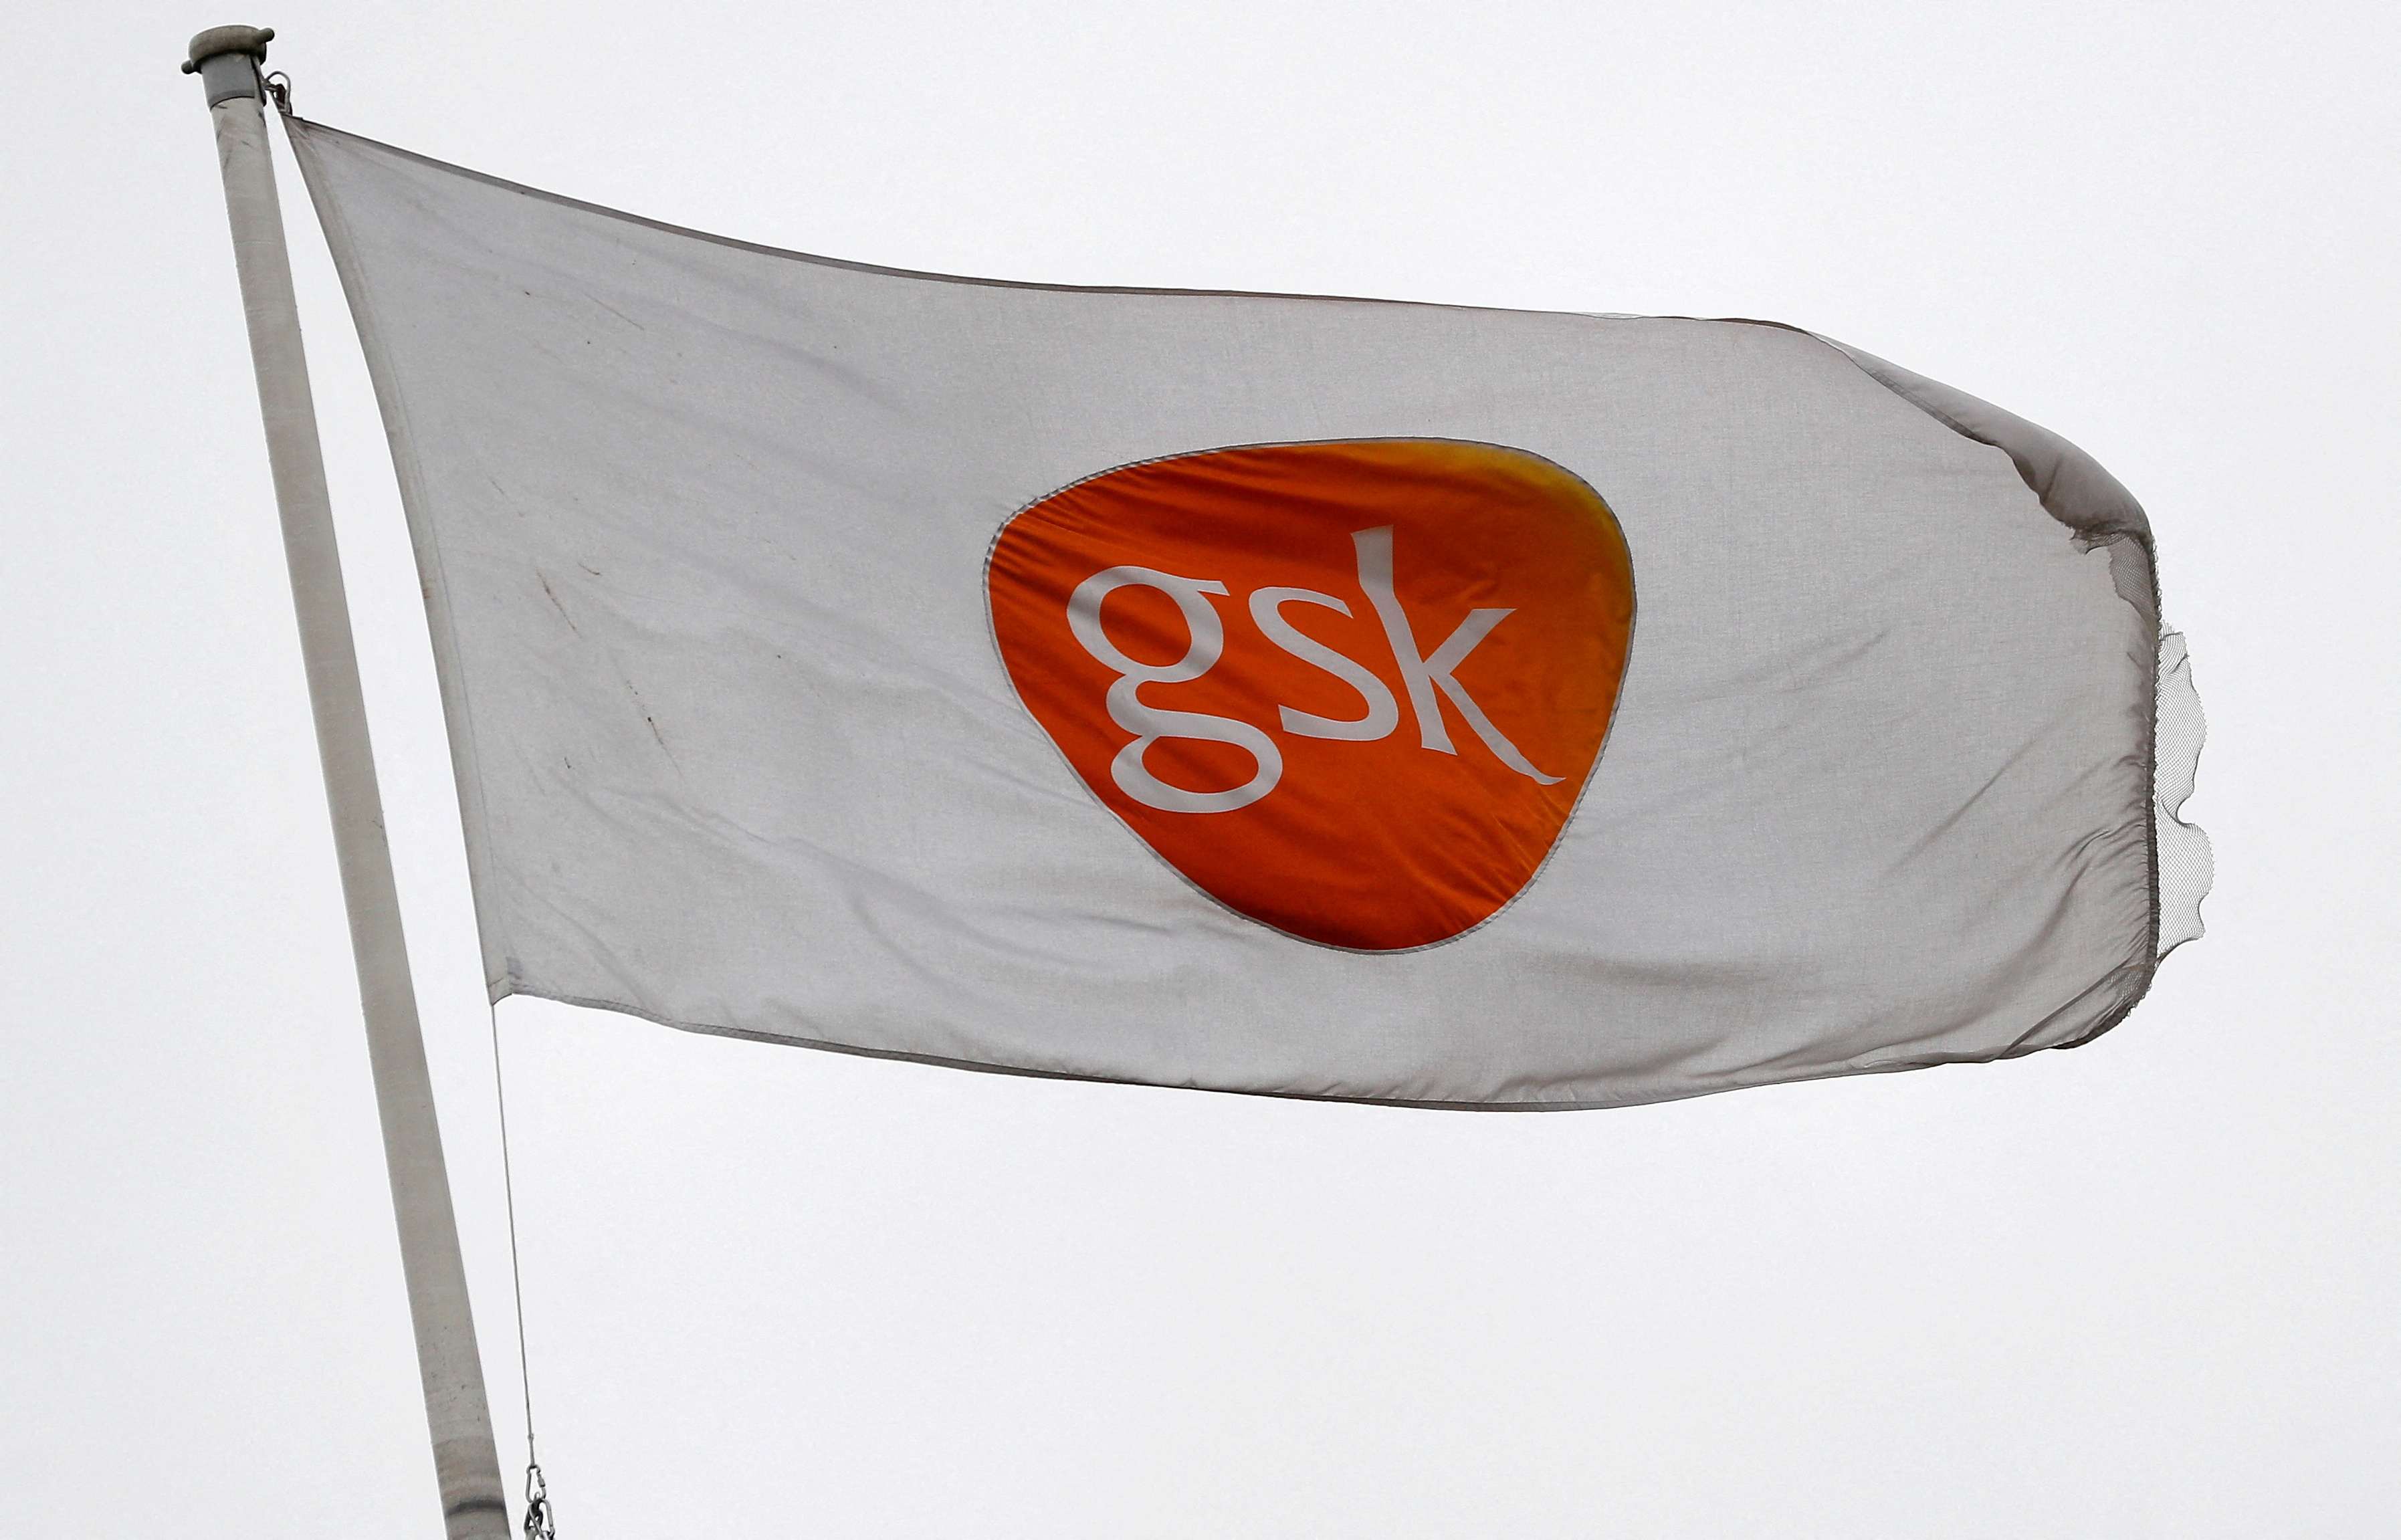 A GSK logo is seen on a flag at a GSK research centre in Stevenage